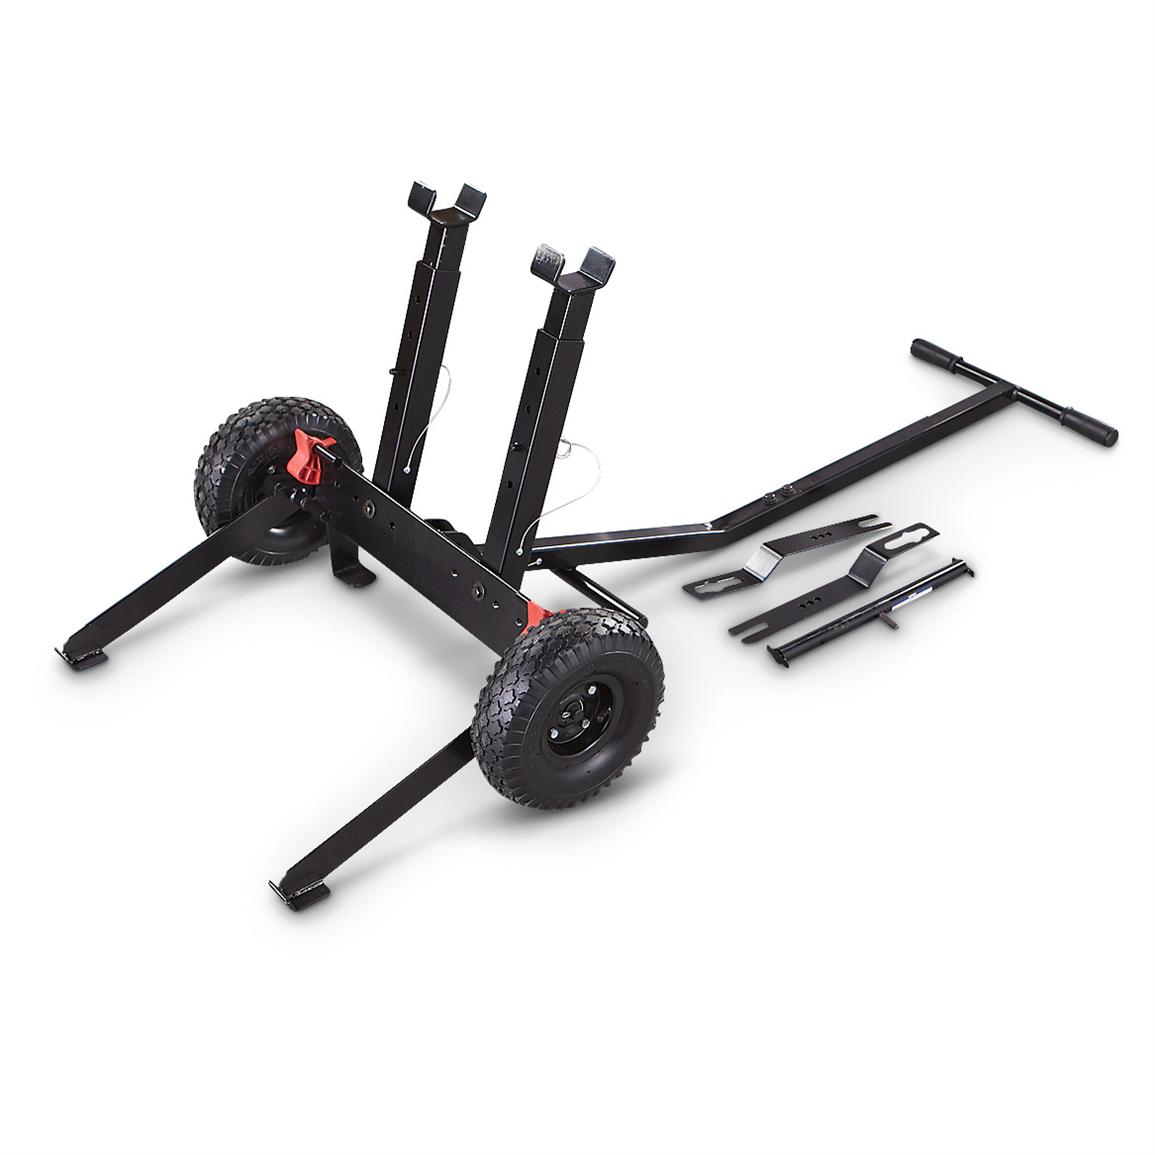 Craftsman® Tractor Lift, Black - 226030, Lawn & Pull Behind Mowers at